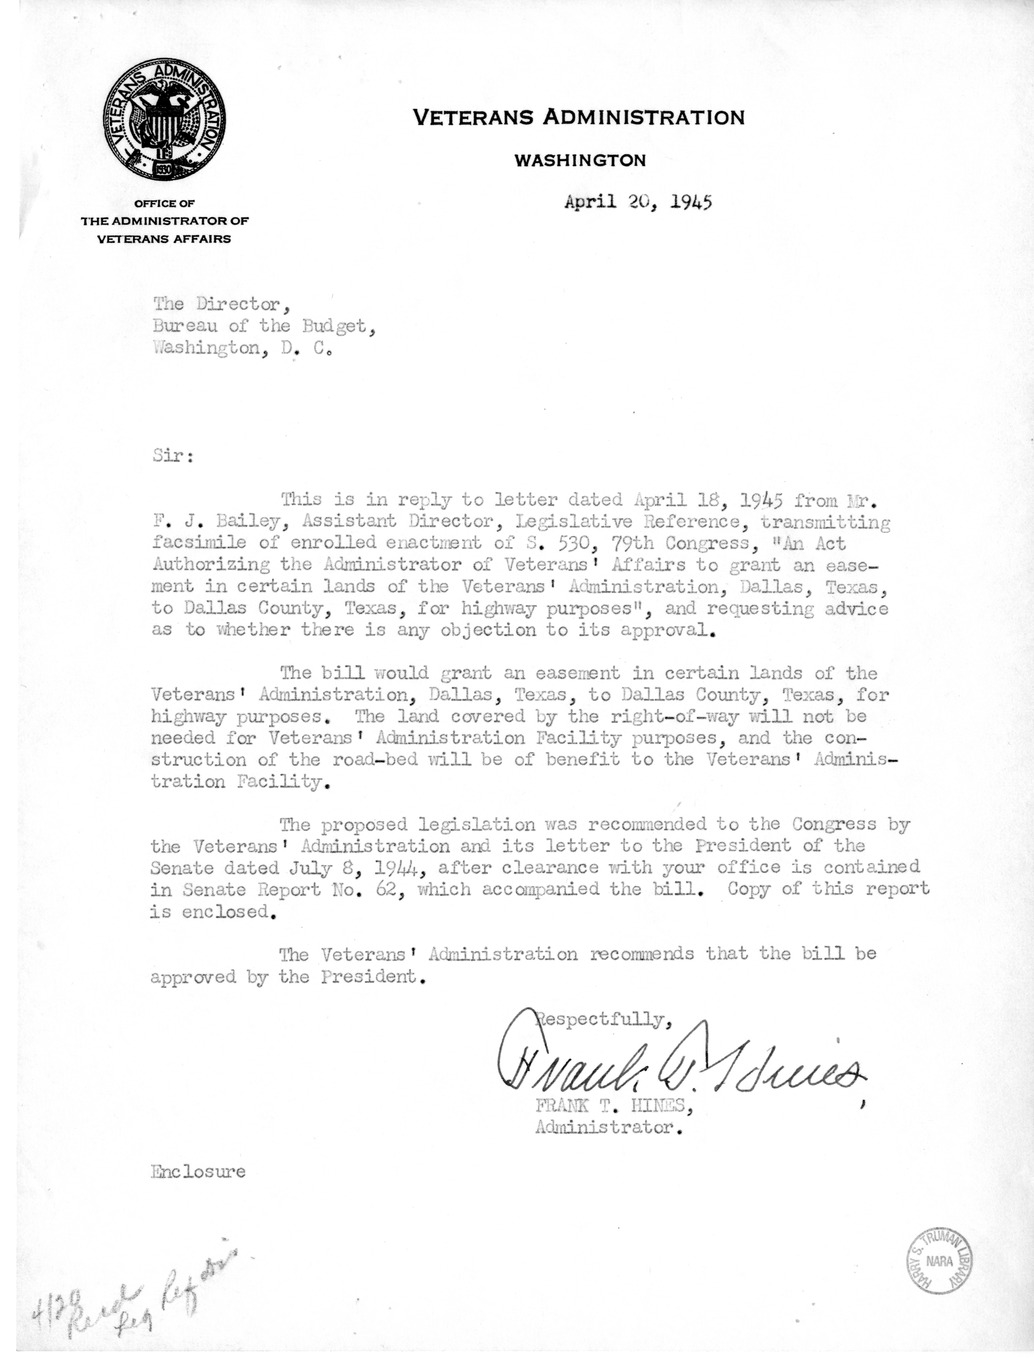 Memorandum from Frederick J. Bailey to M. C. Latta, S. 530, Act Authorizing the Administrator of Veterans' Affairs to Grant an Easement, in Dallas, Texas, with Attachments